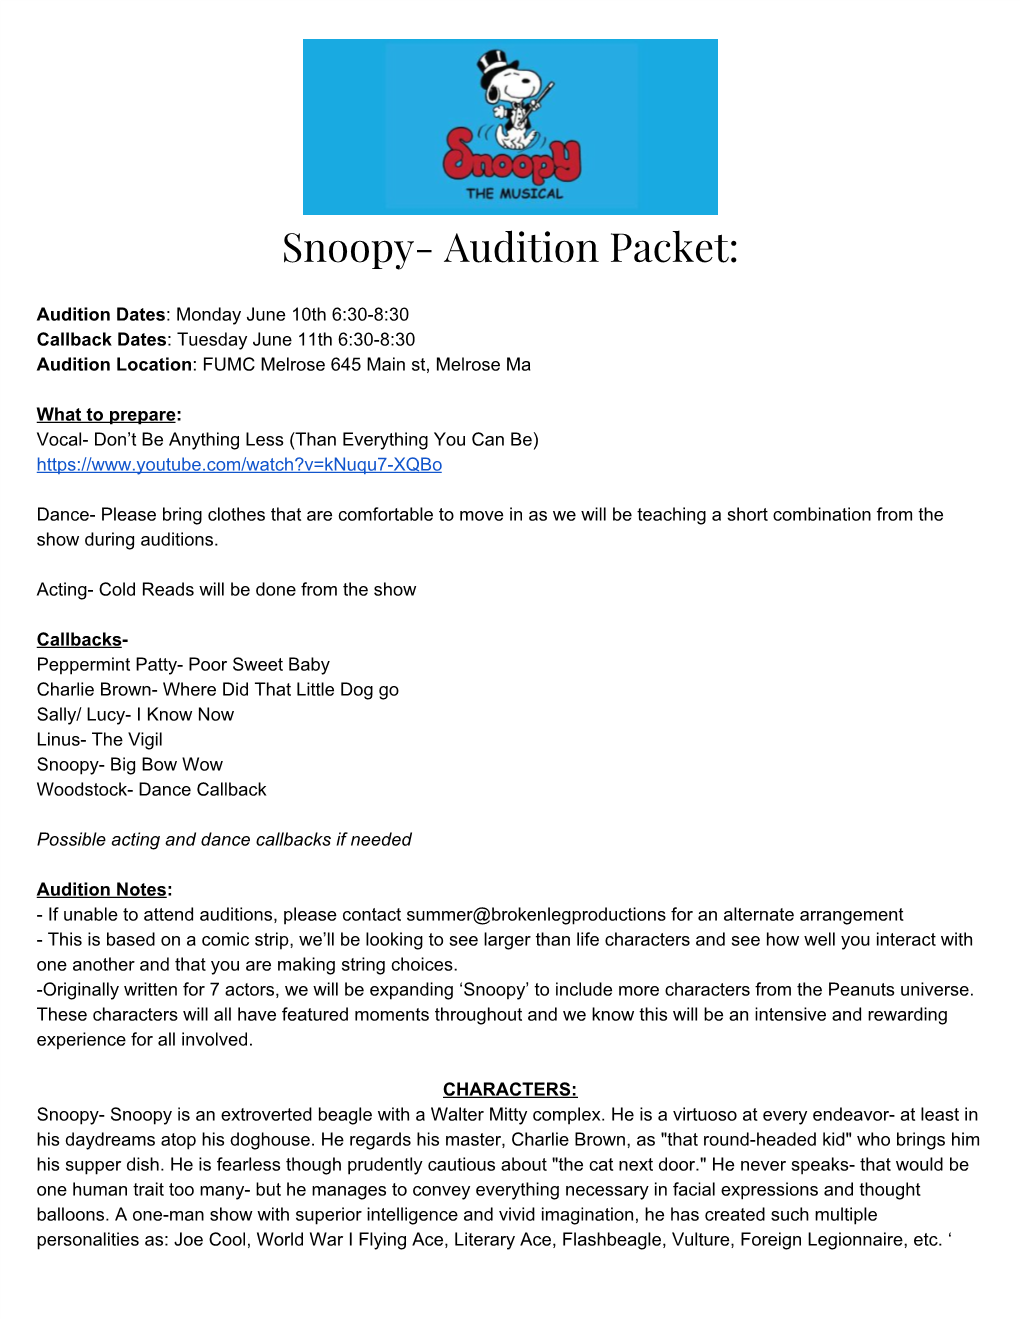 Snoopy- Audition Packet